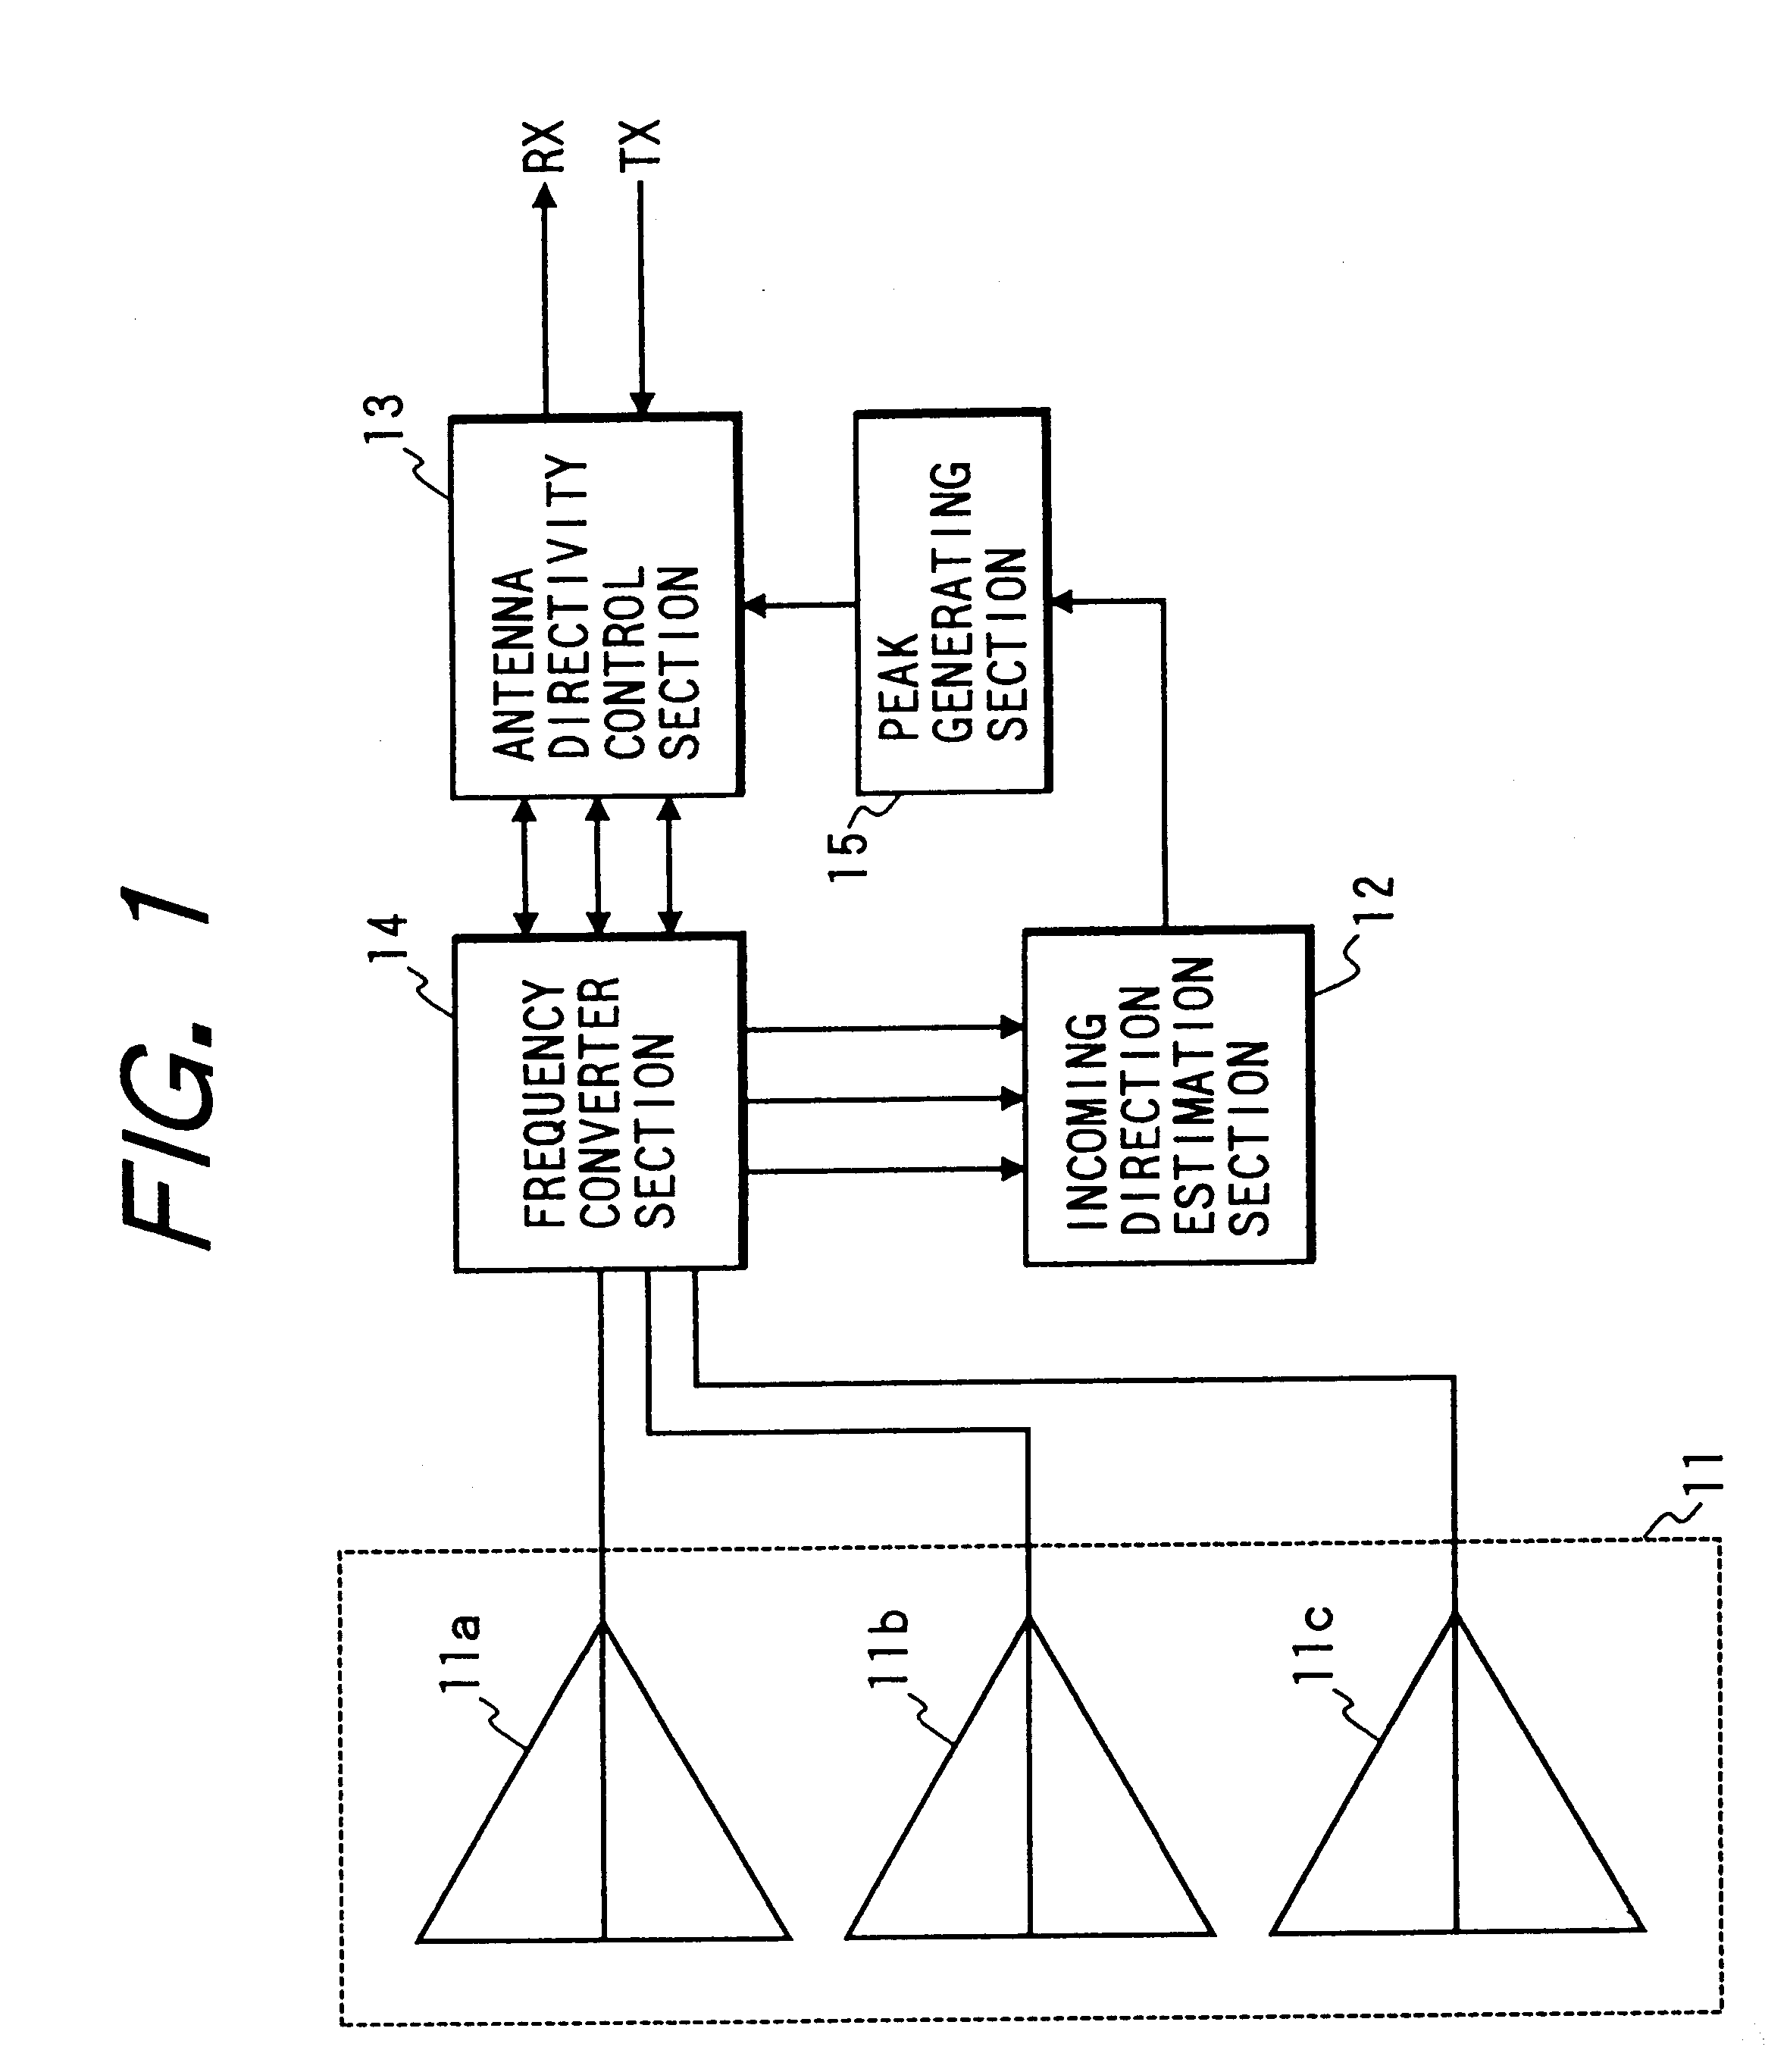 Directivity control antenna apparatus for shaping the radiation pattern of antenna of base station in mobile communication system in accordance with estimated directions or positions of mobile stations with which communication is in progress